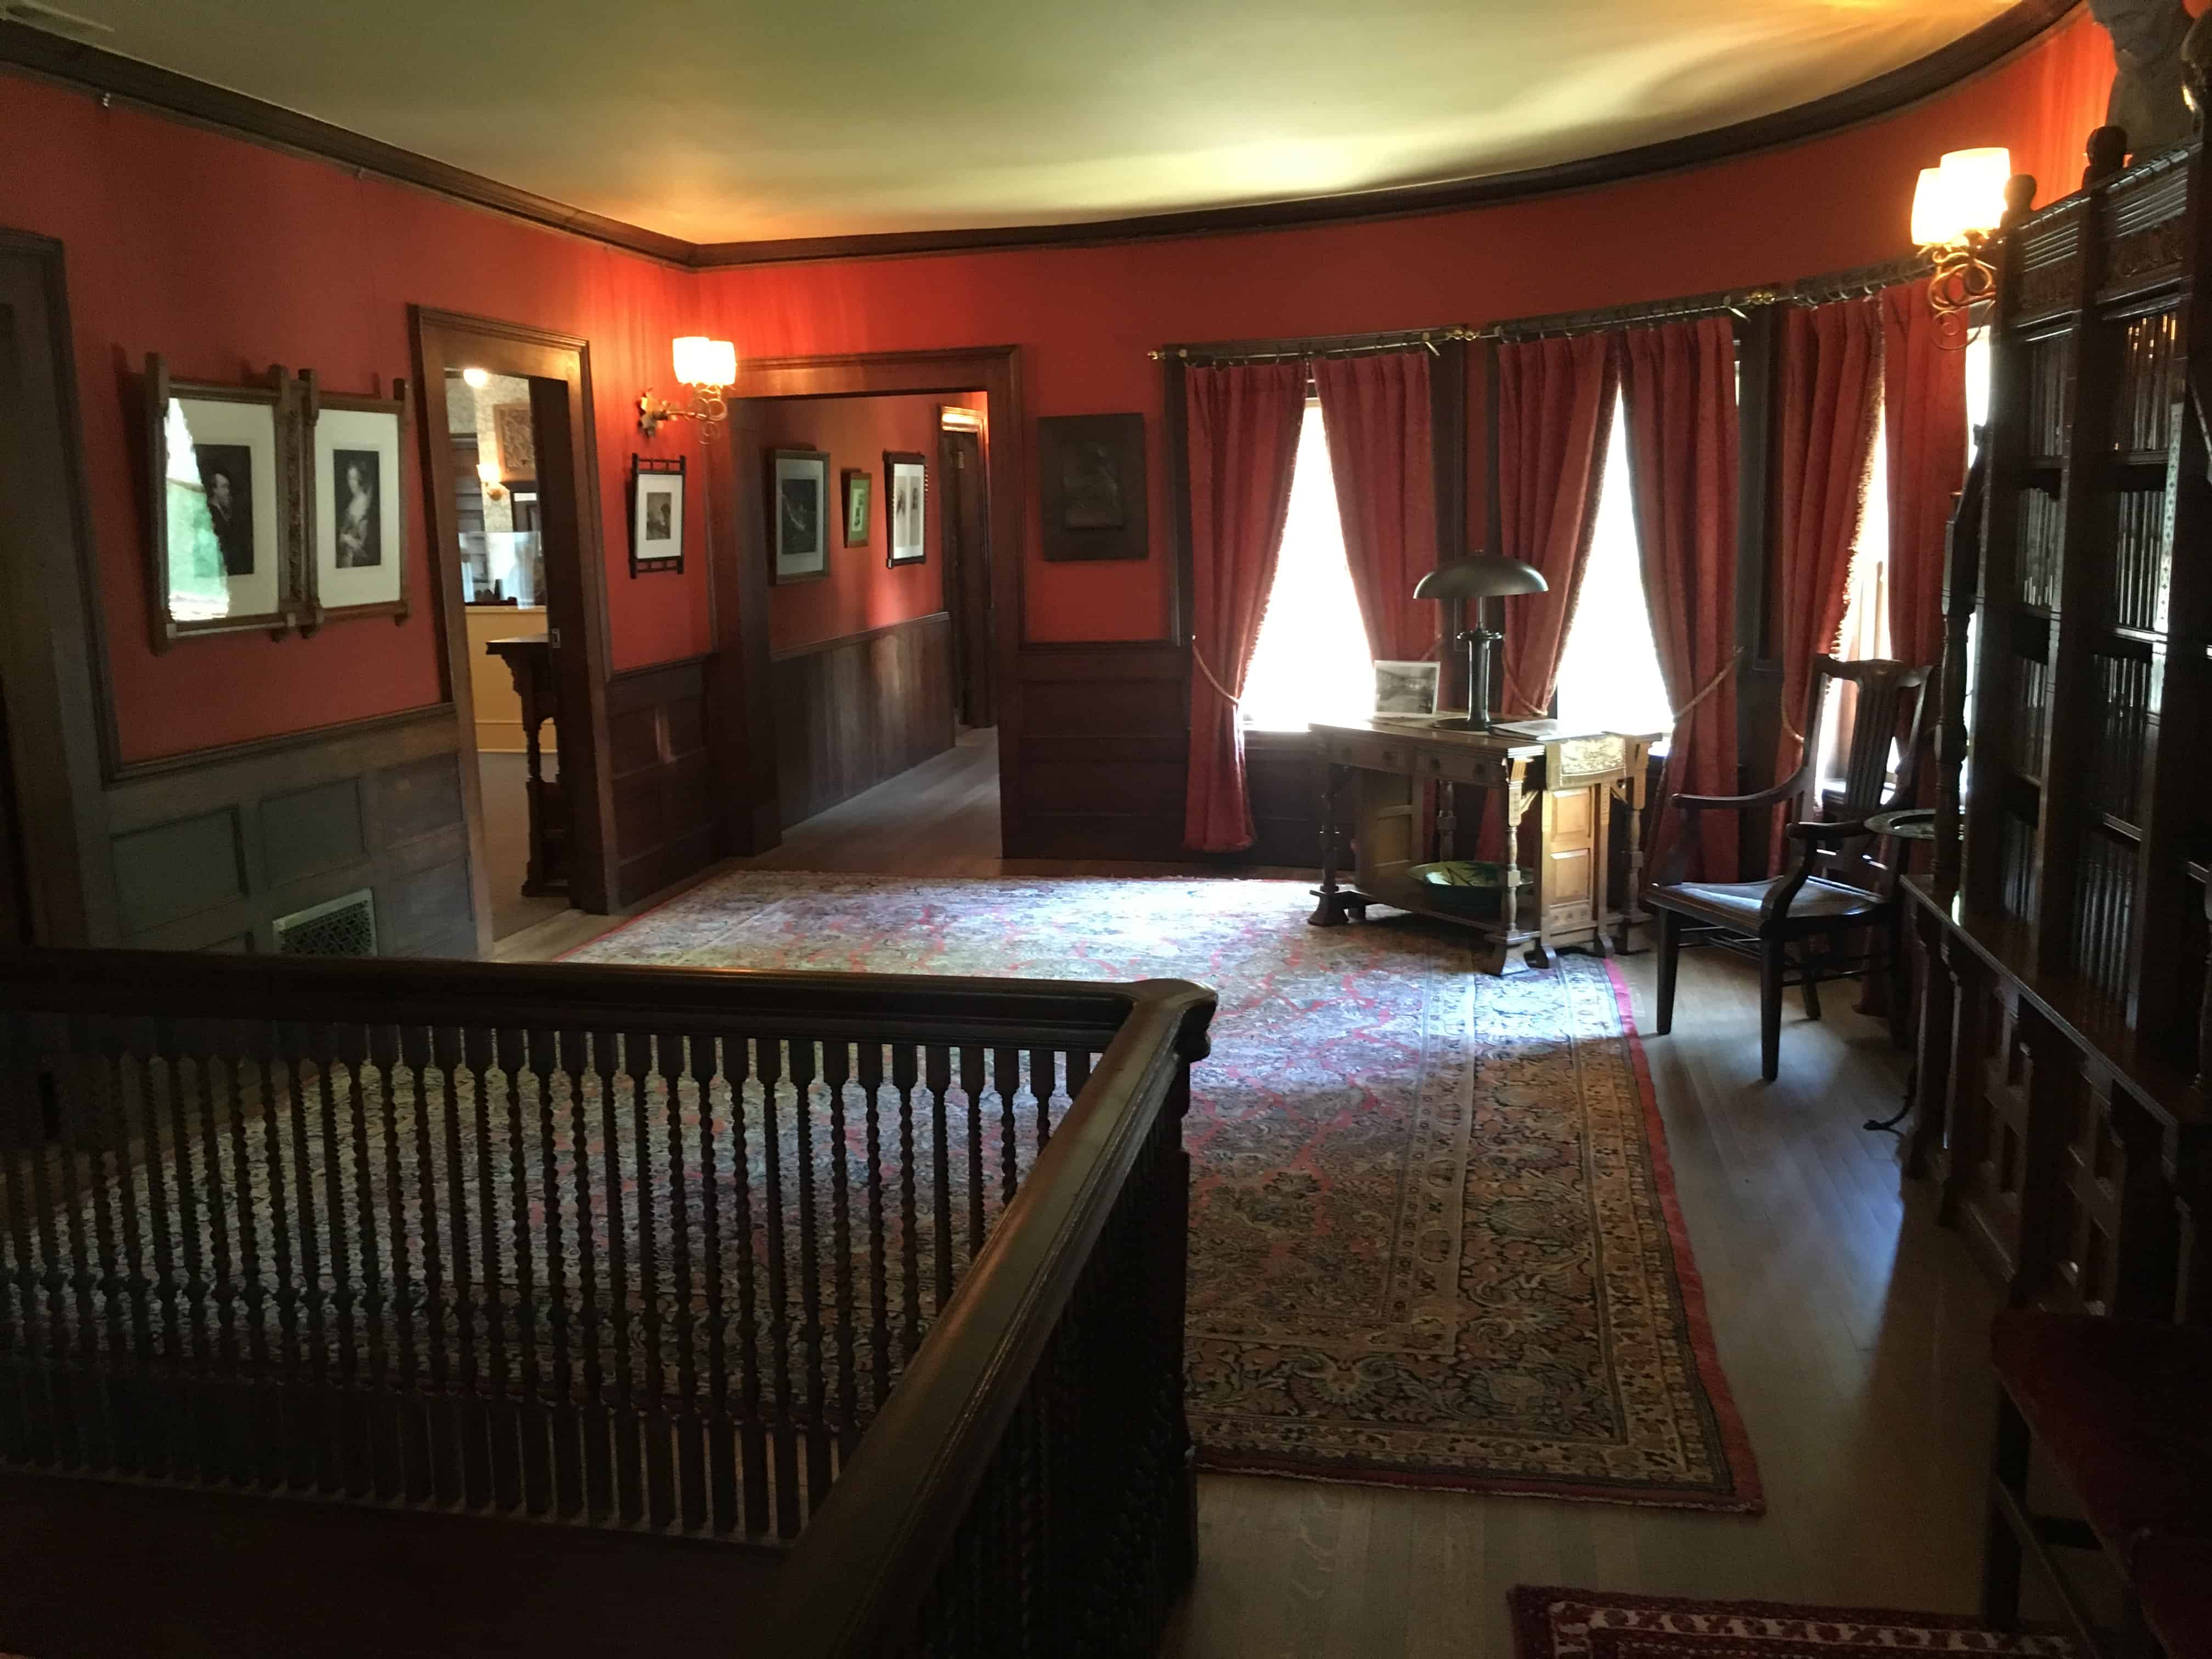 Upstairs hallway at the John J. Glessner House in Chicago, Illinois